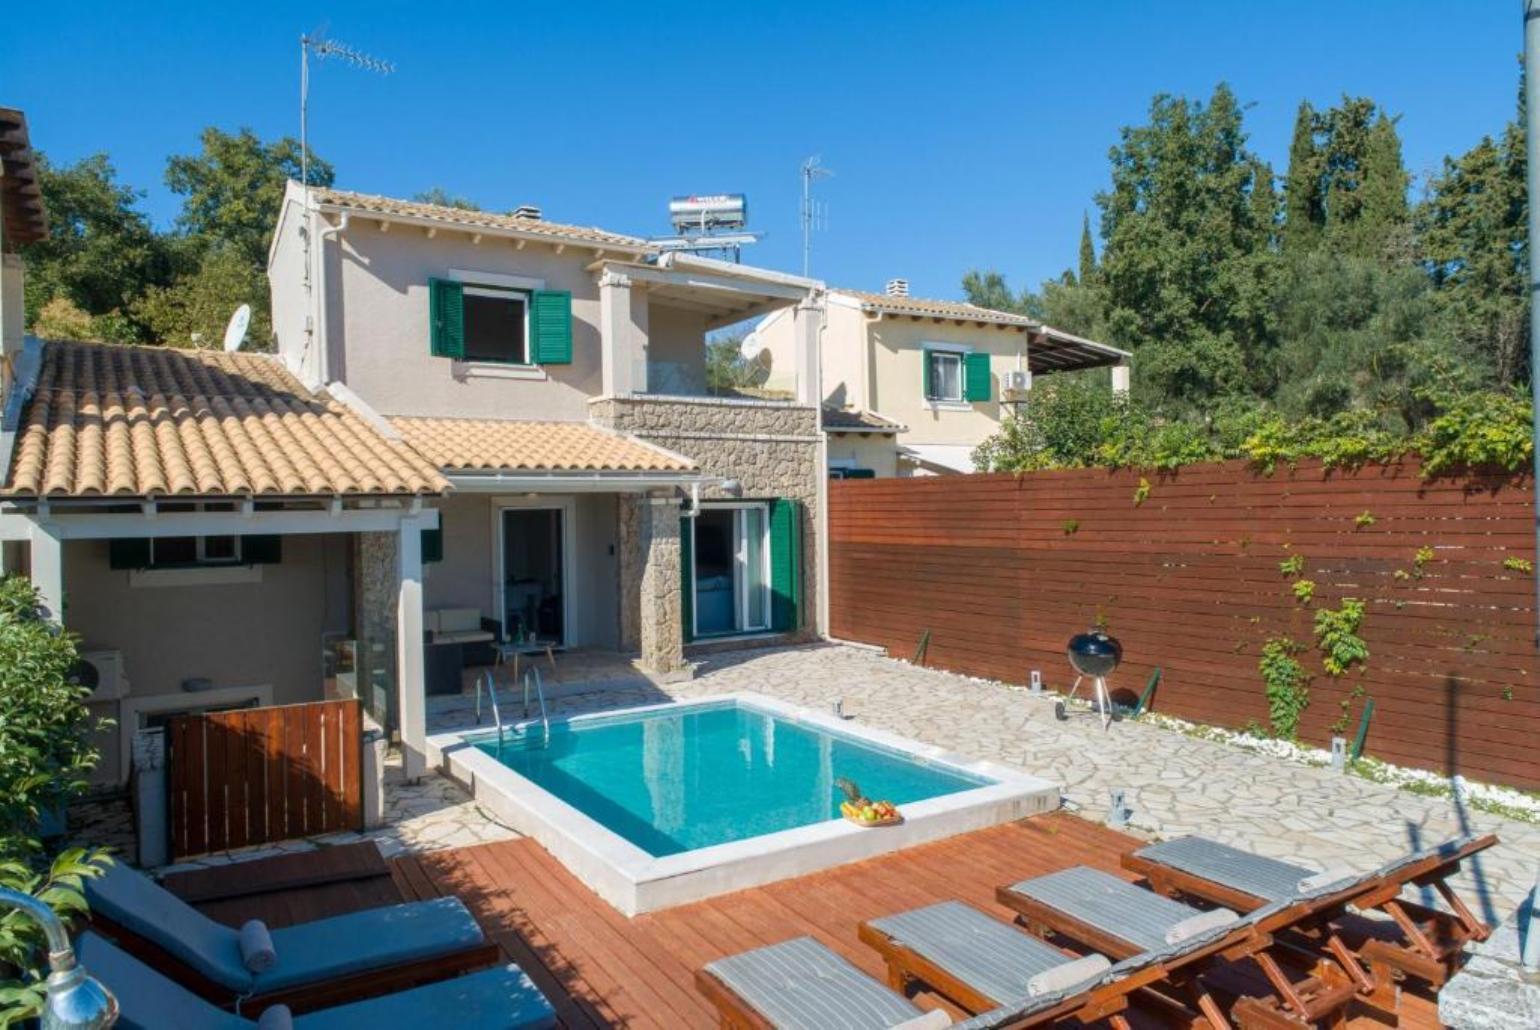 Beautiful villa with private swimming pool and sheltered area